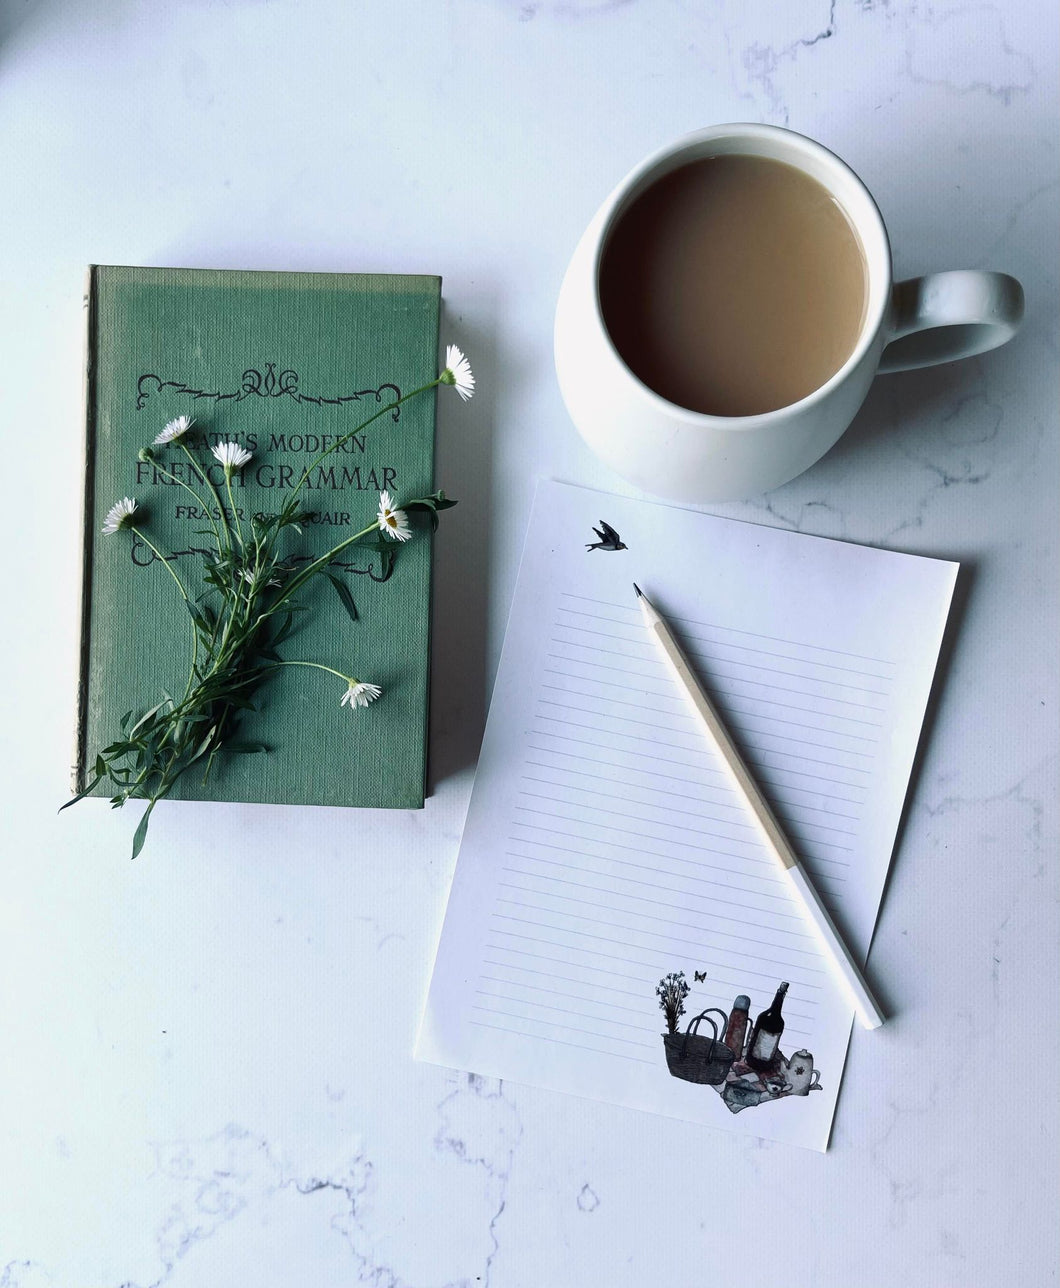 The Tea + Toast Club Digital: A Digital Stationery Subscription for Letter Writers